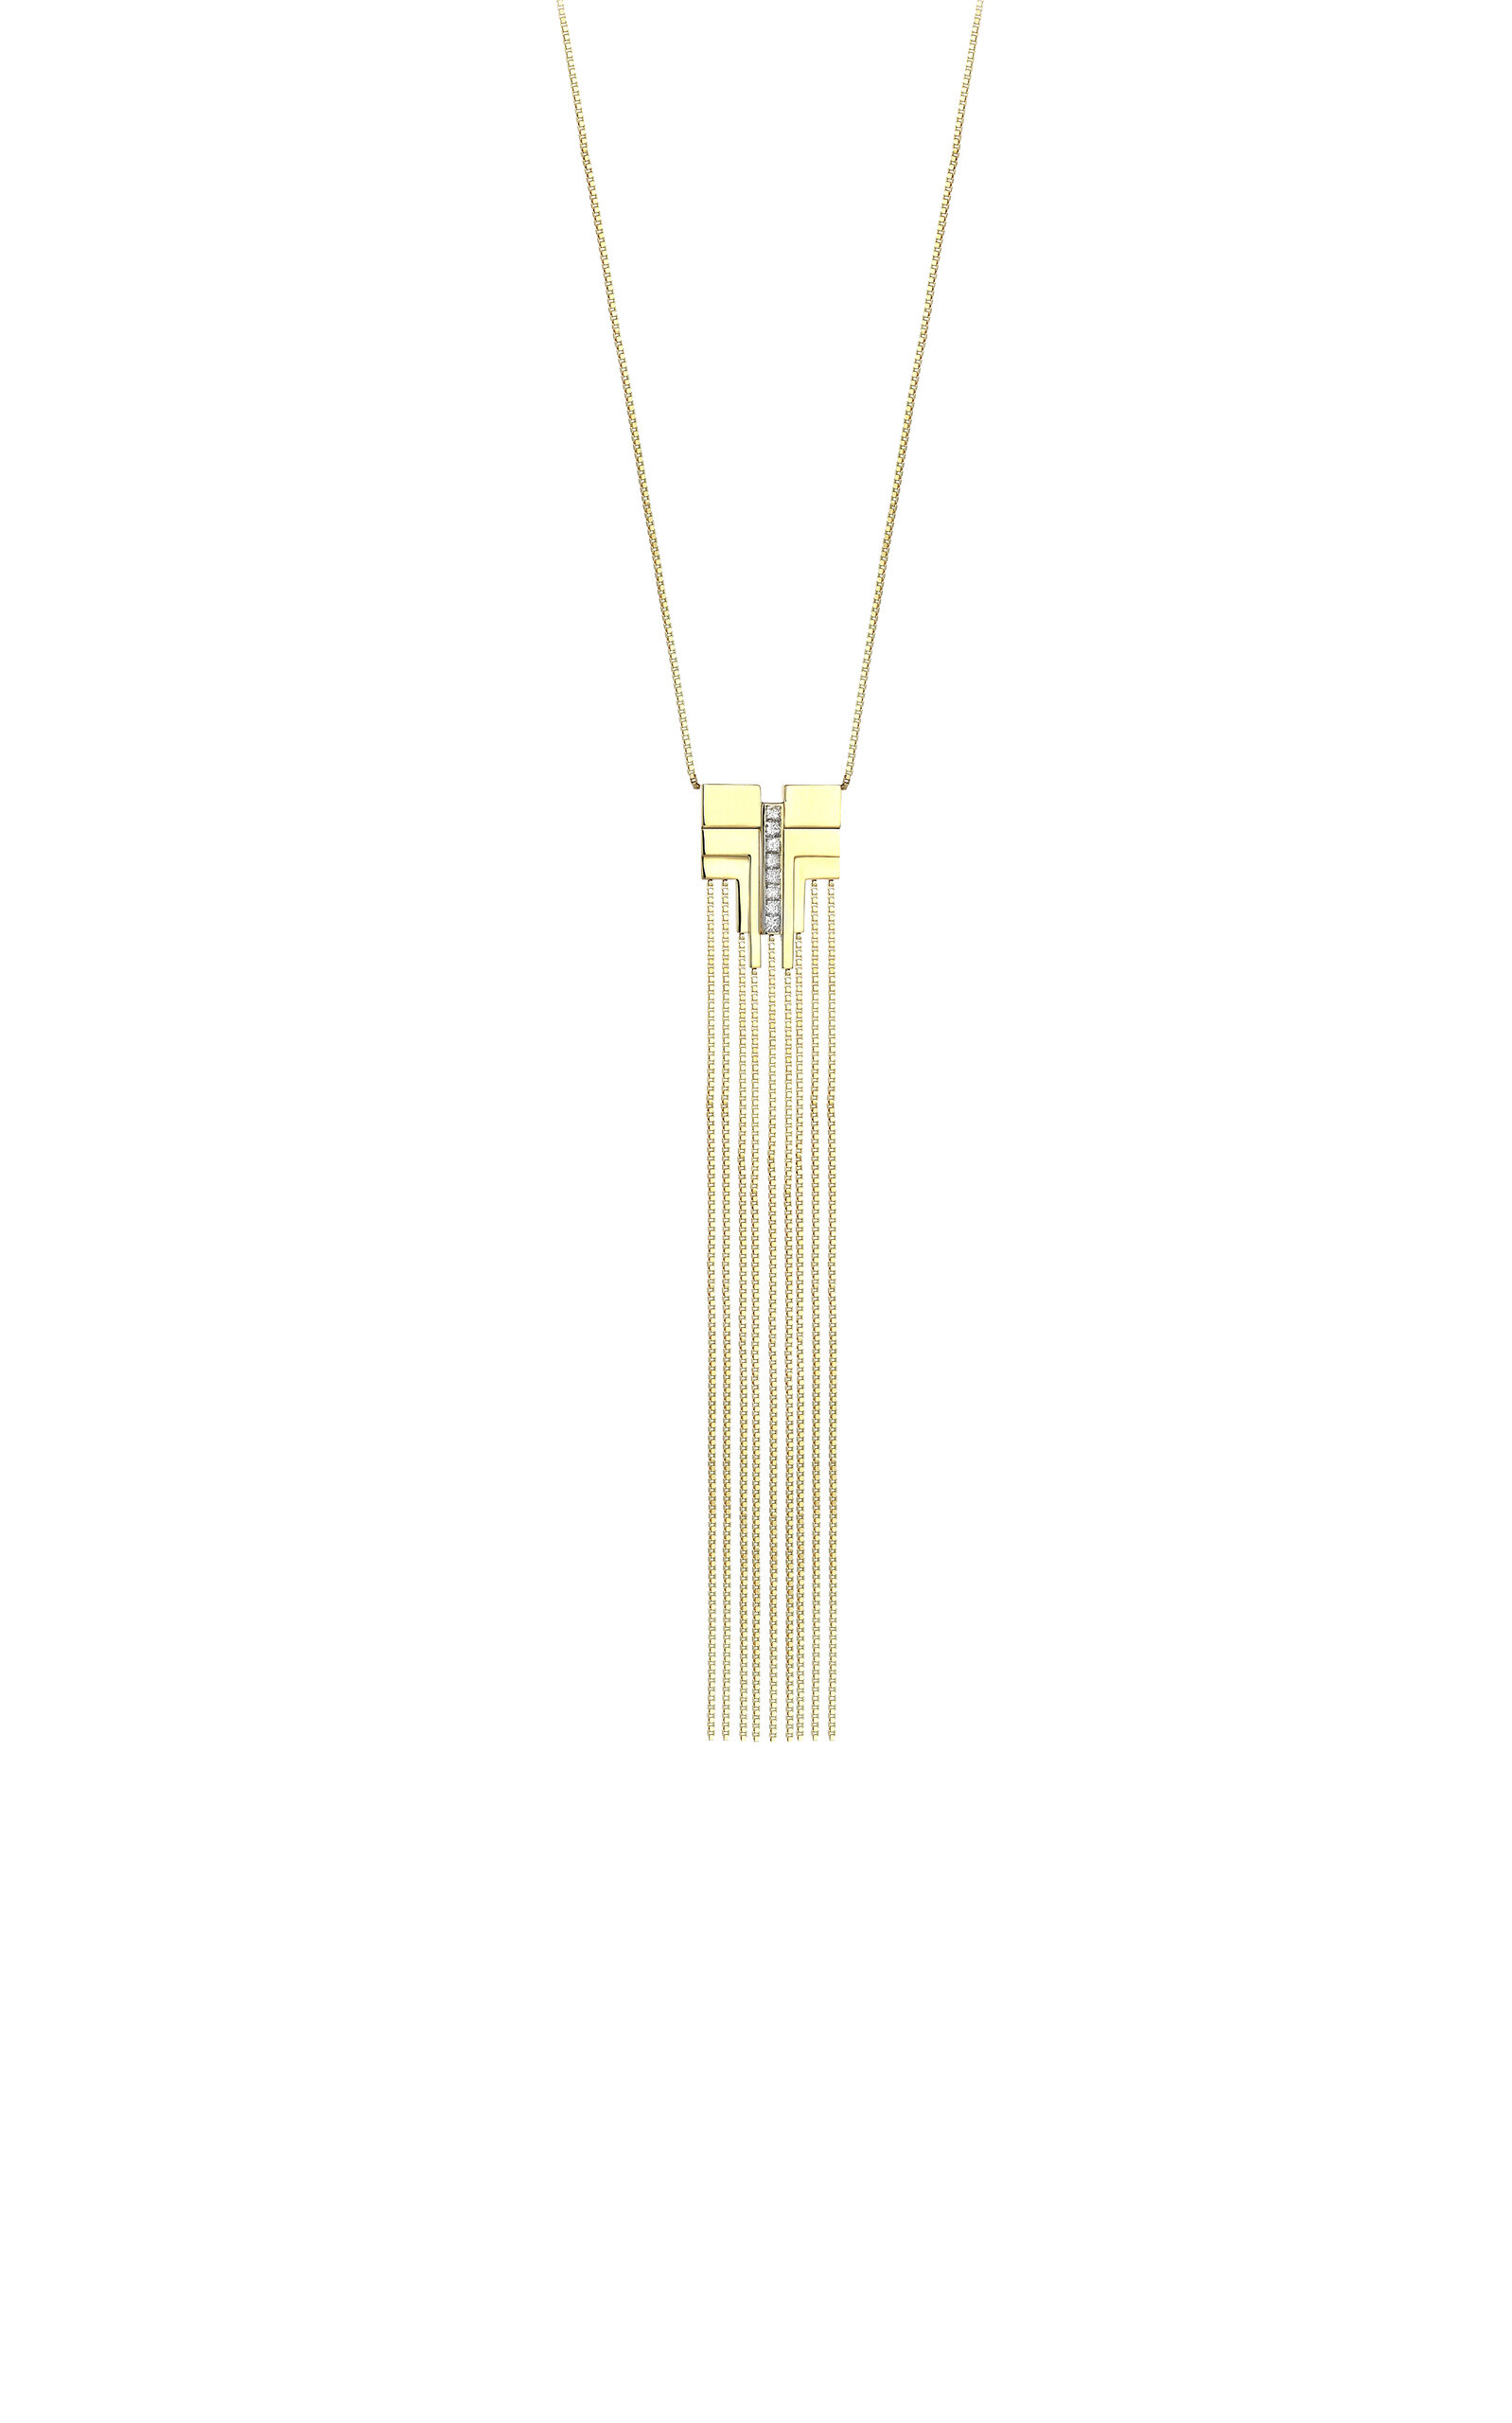 Her Story Fringe Tie 14k Yellow Gold Diamond Necklace